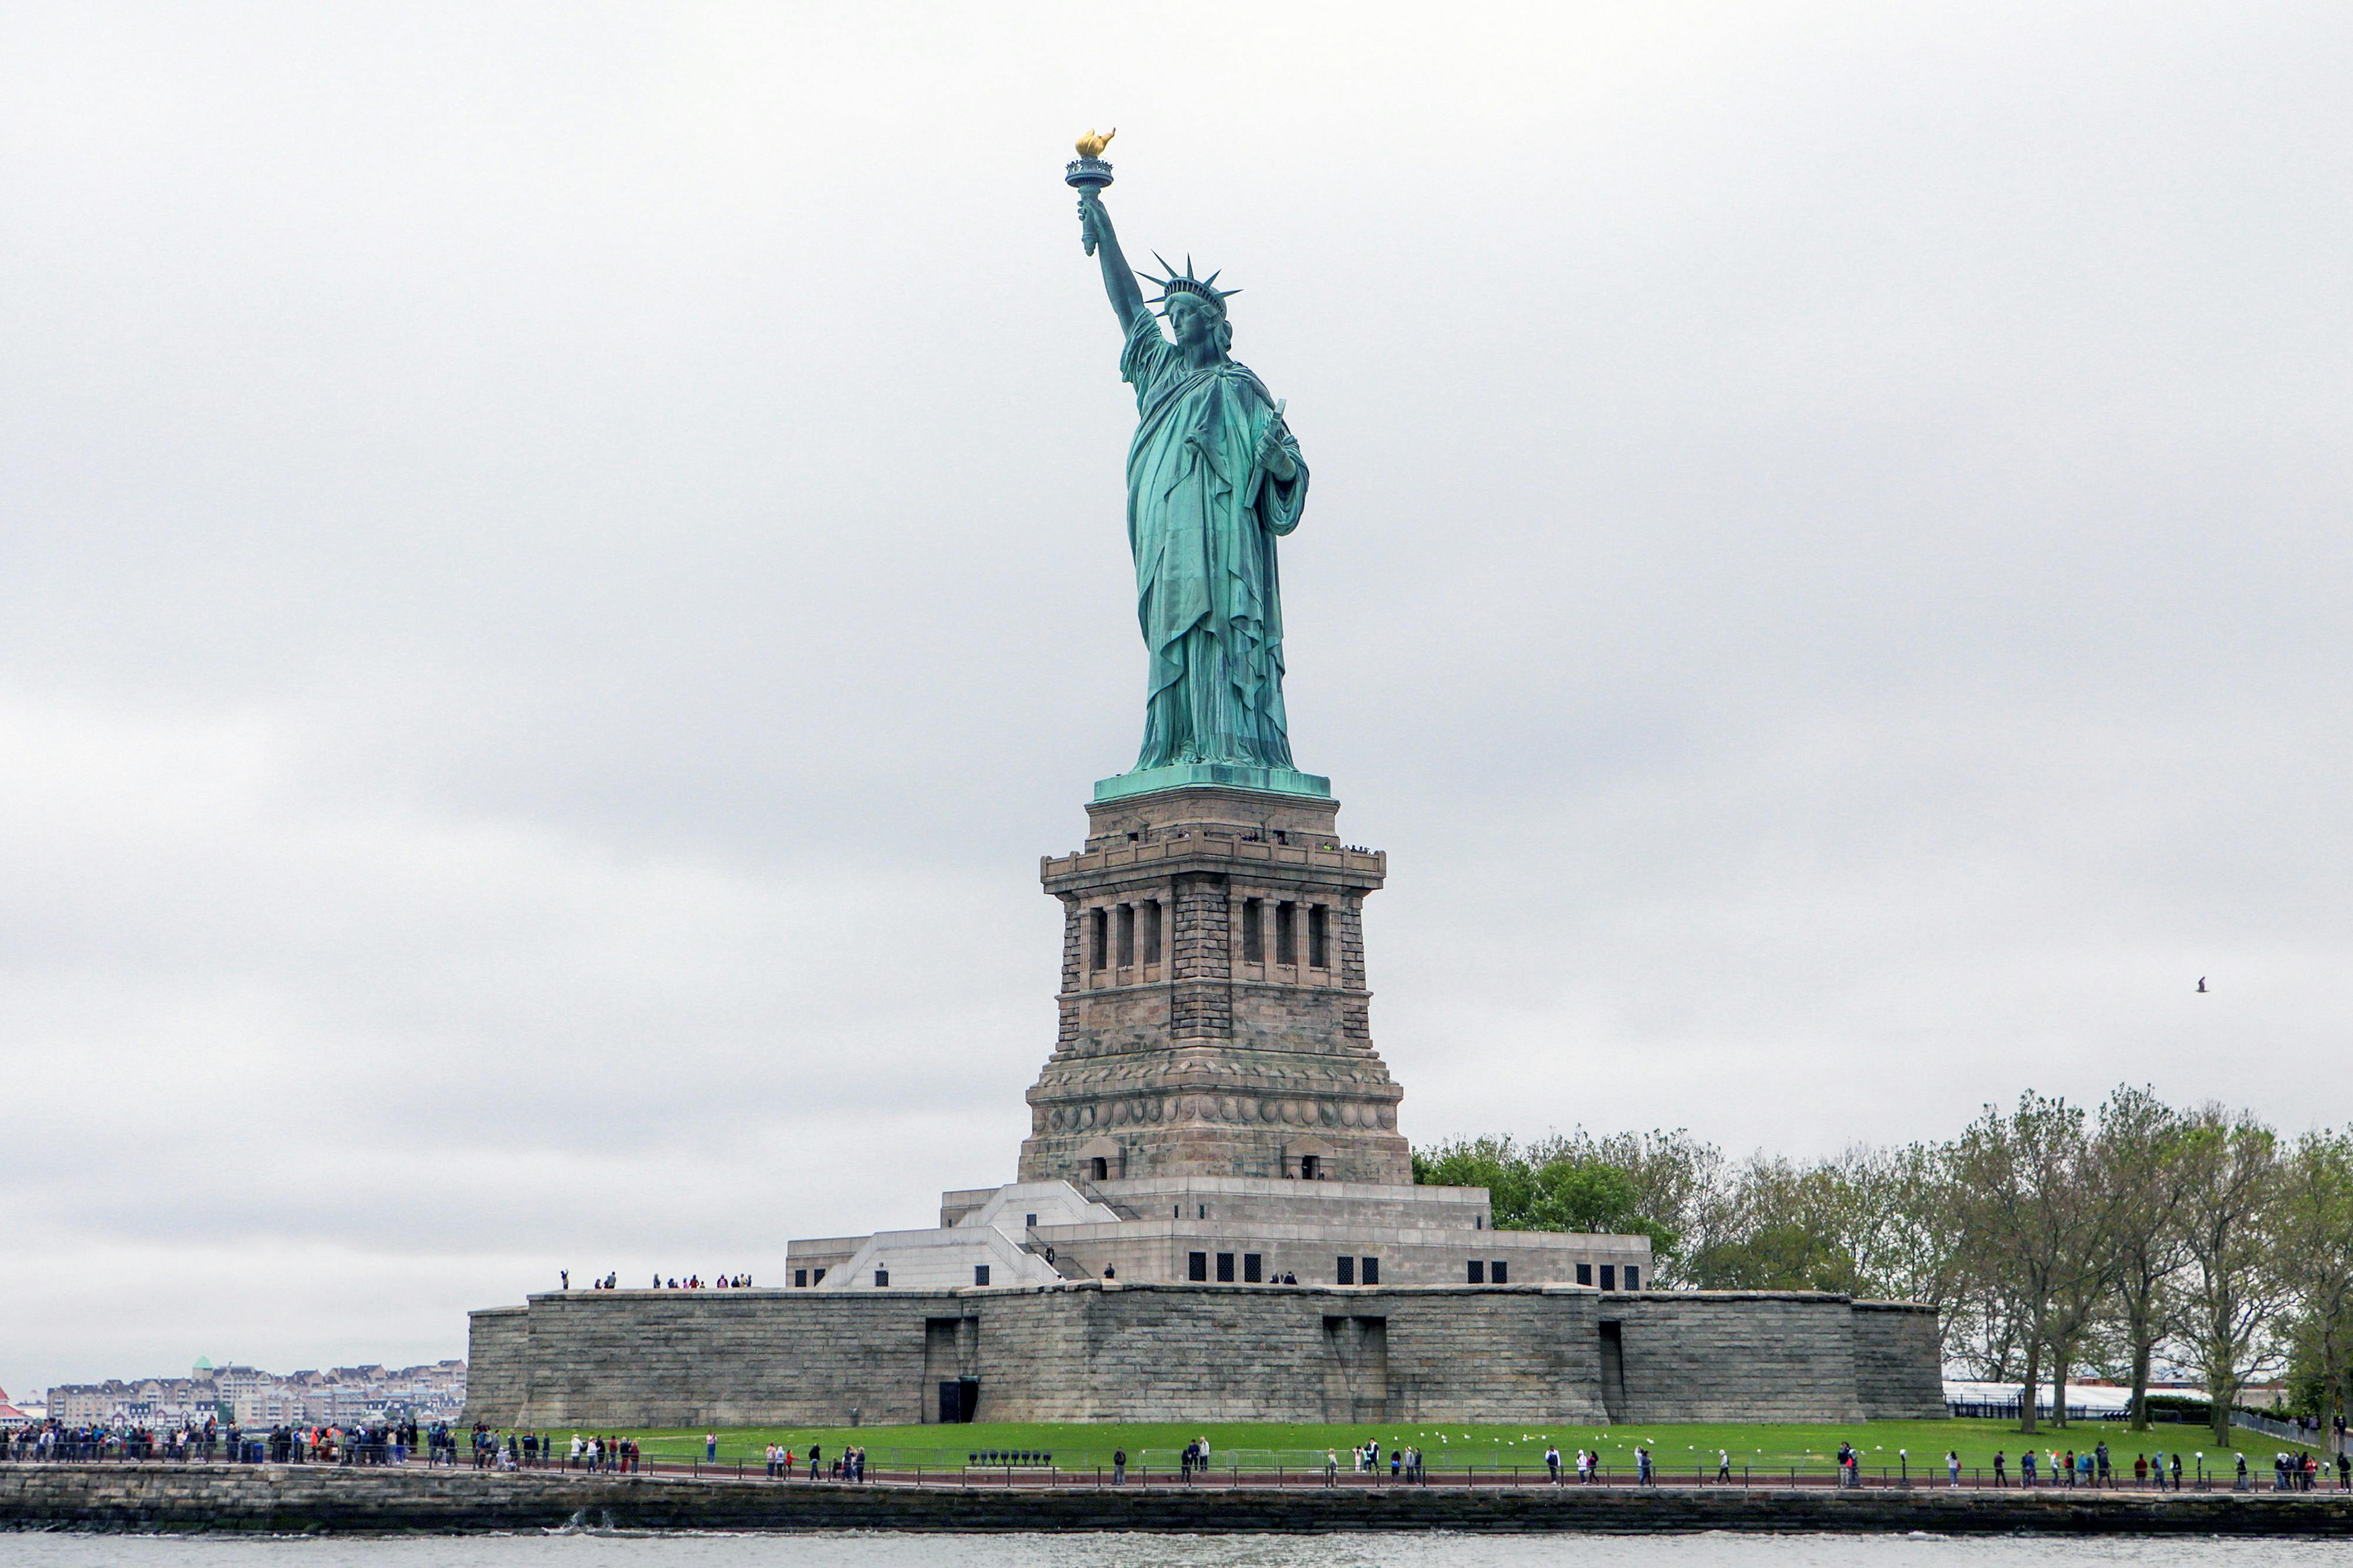 Early Bird tour of the Statue of Liberty and Ellis Island with an expert guide-9